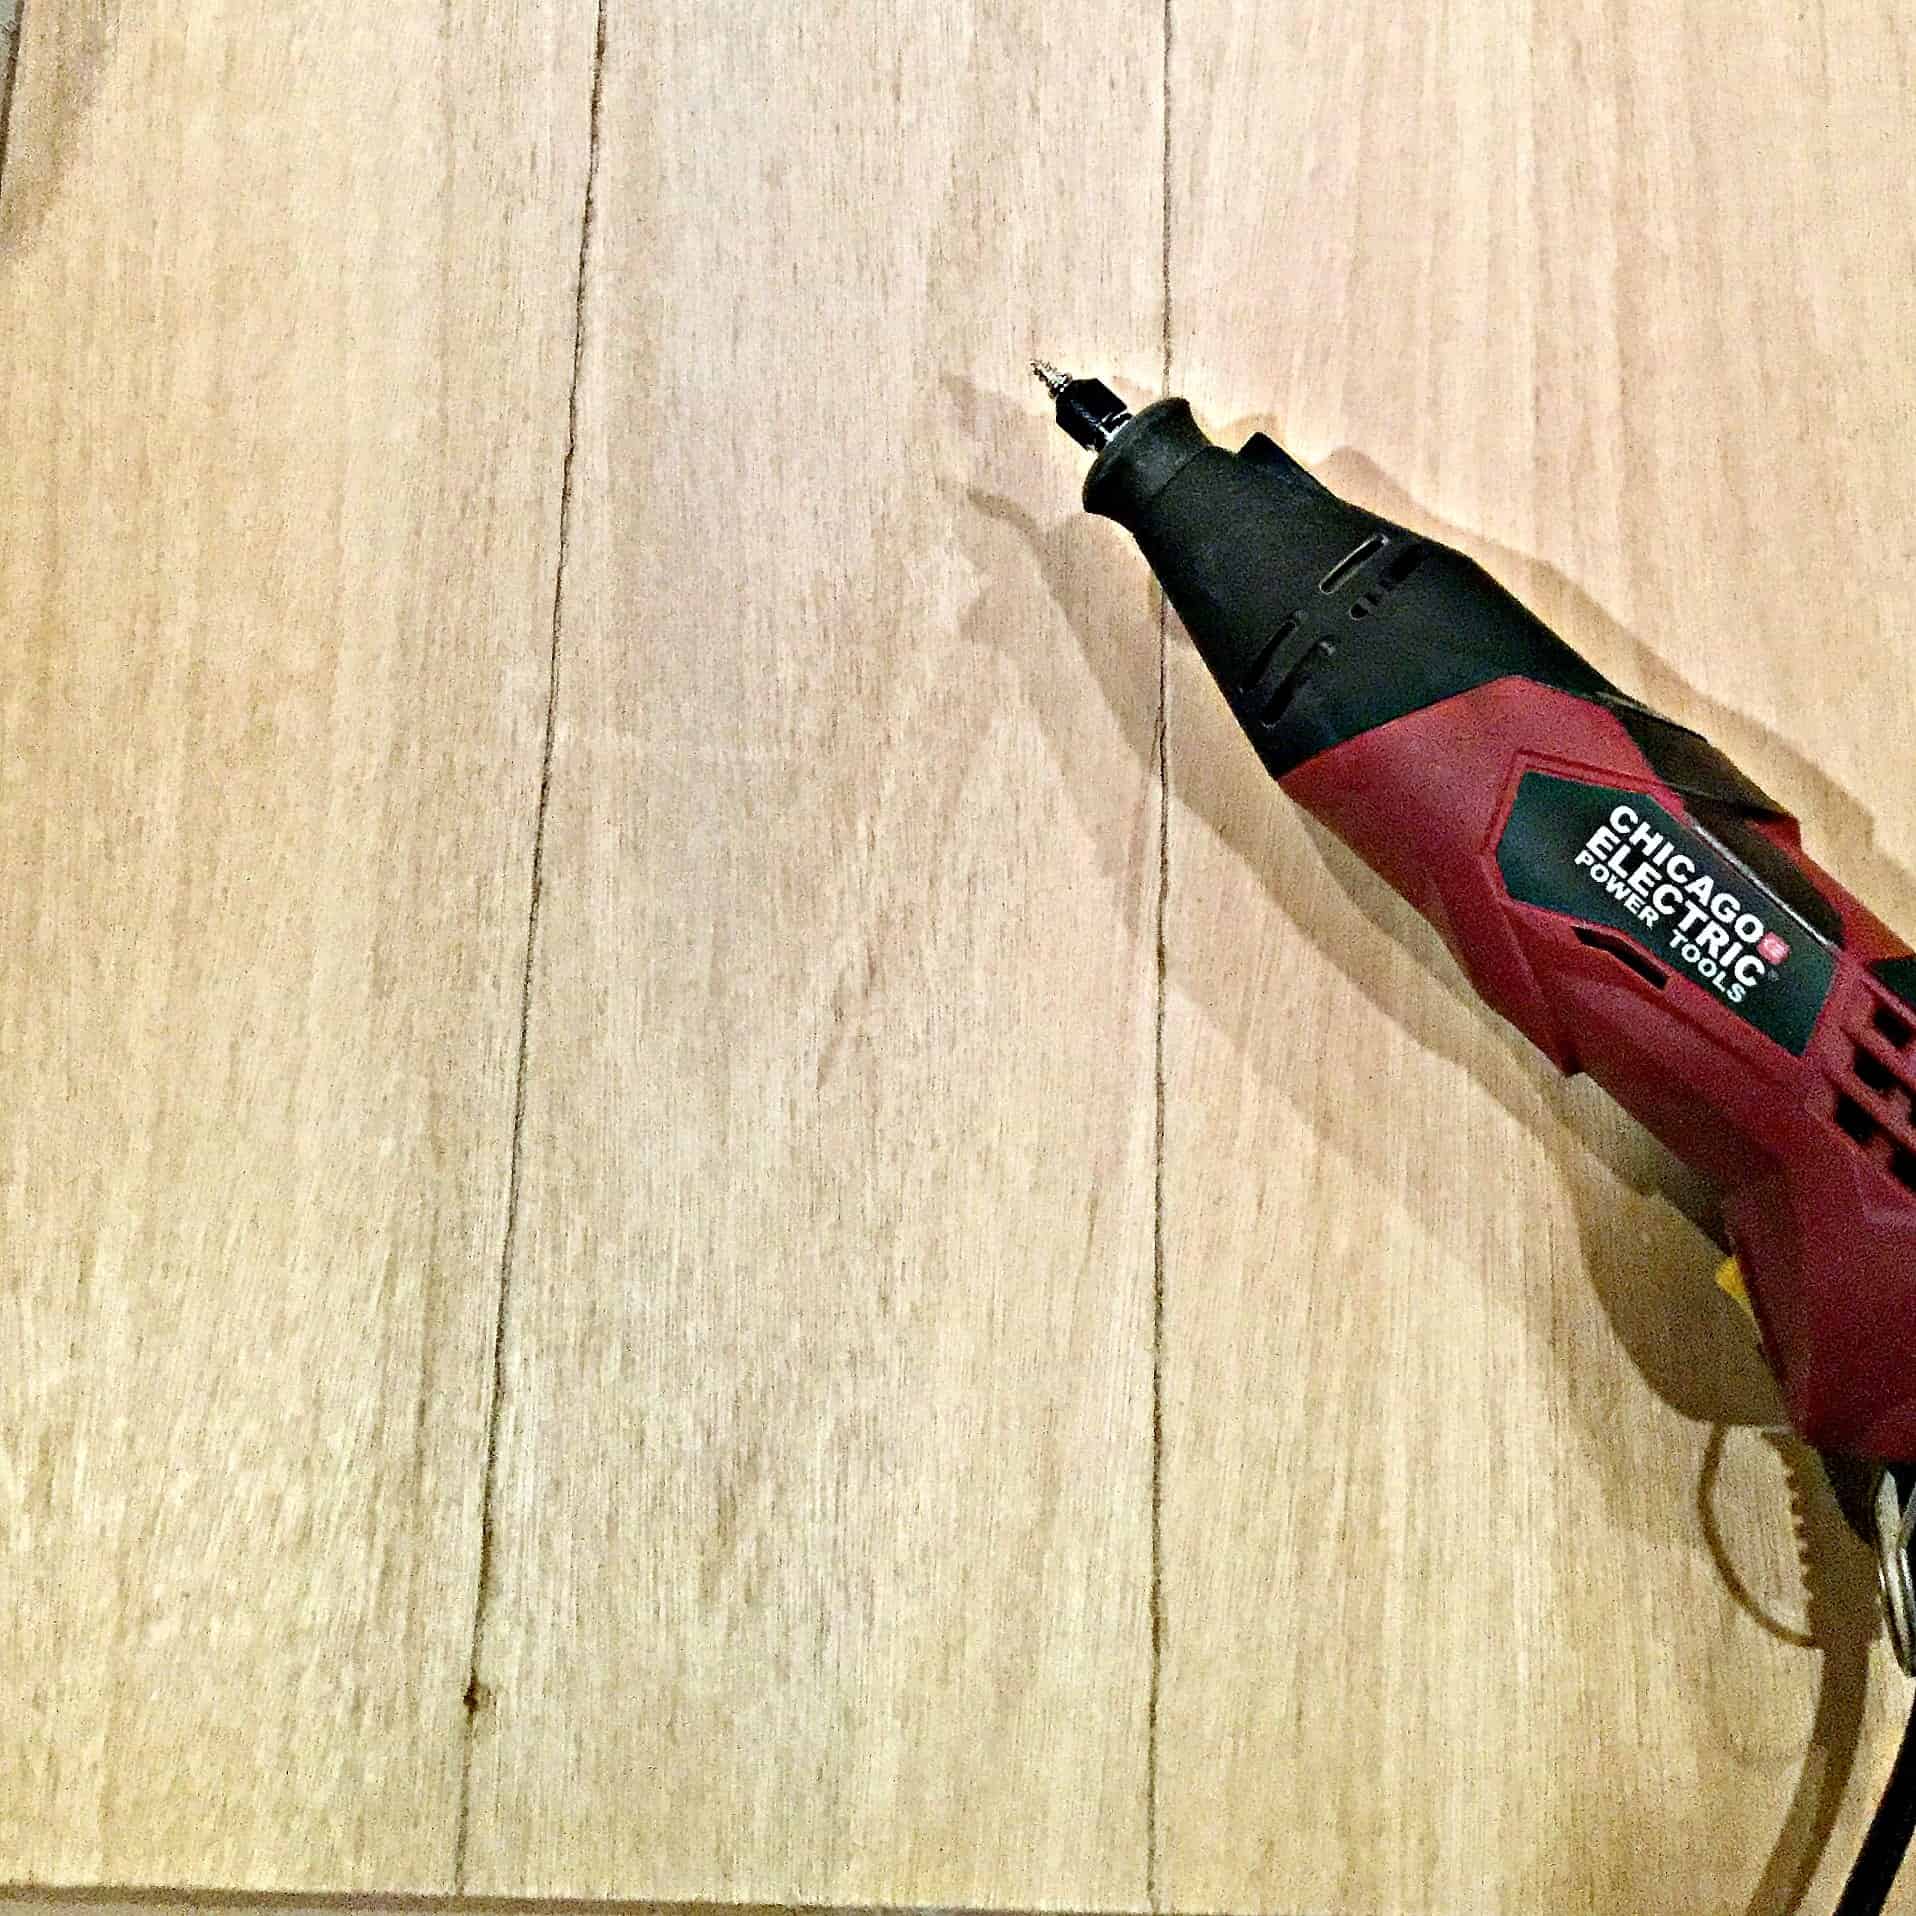 DIY Faux Shiplap Using A Dremel Tool-Creating Grooves in Plywood